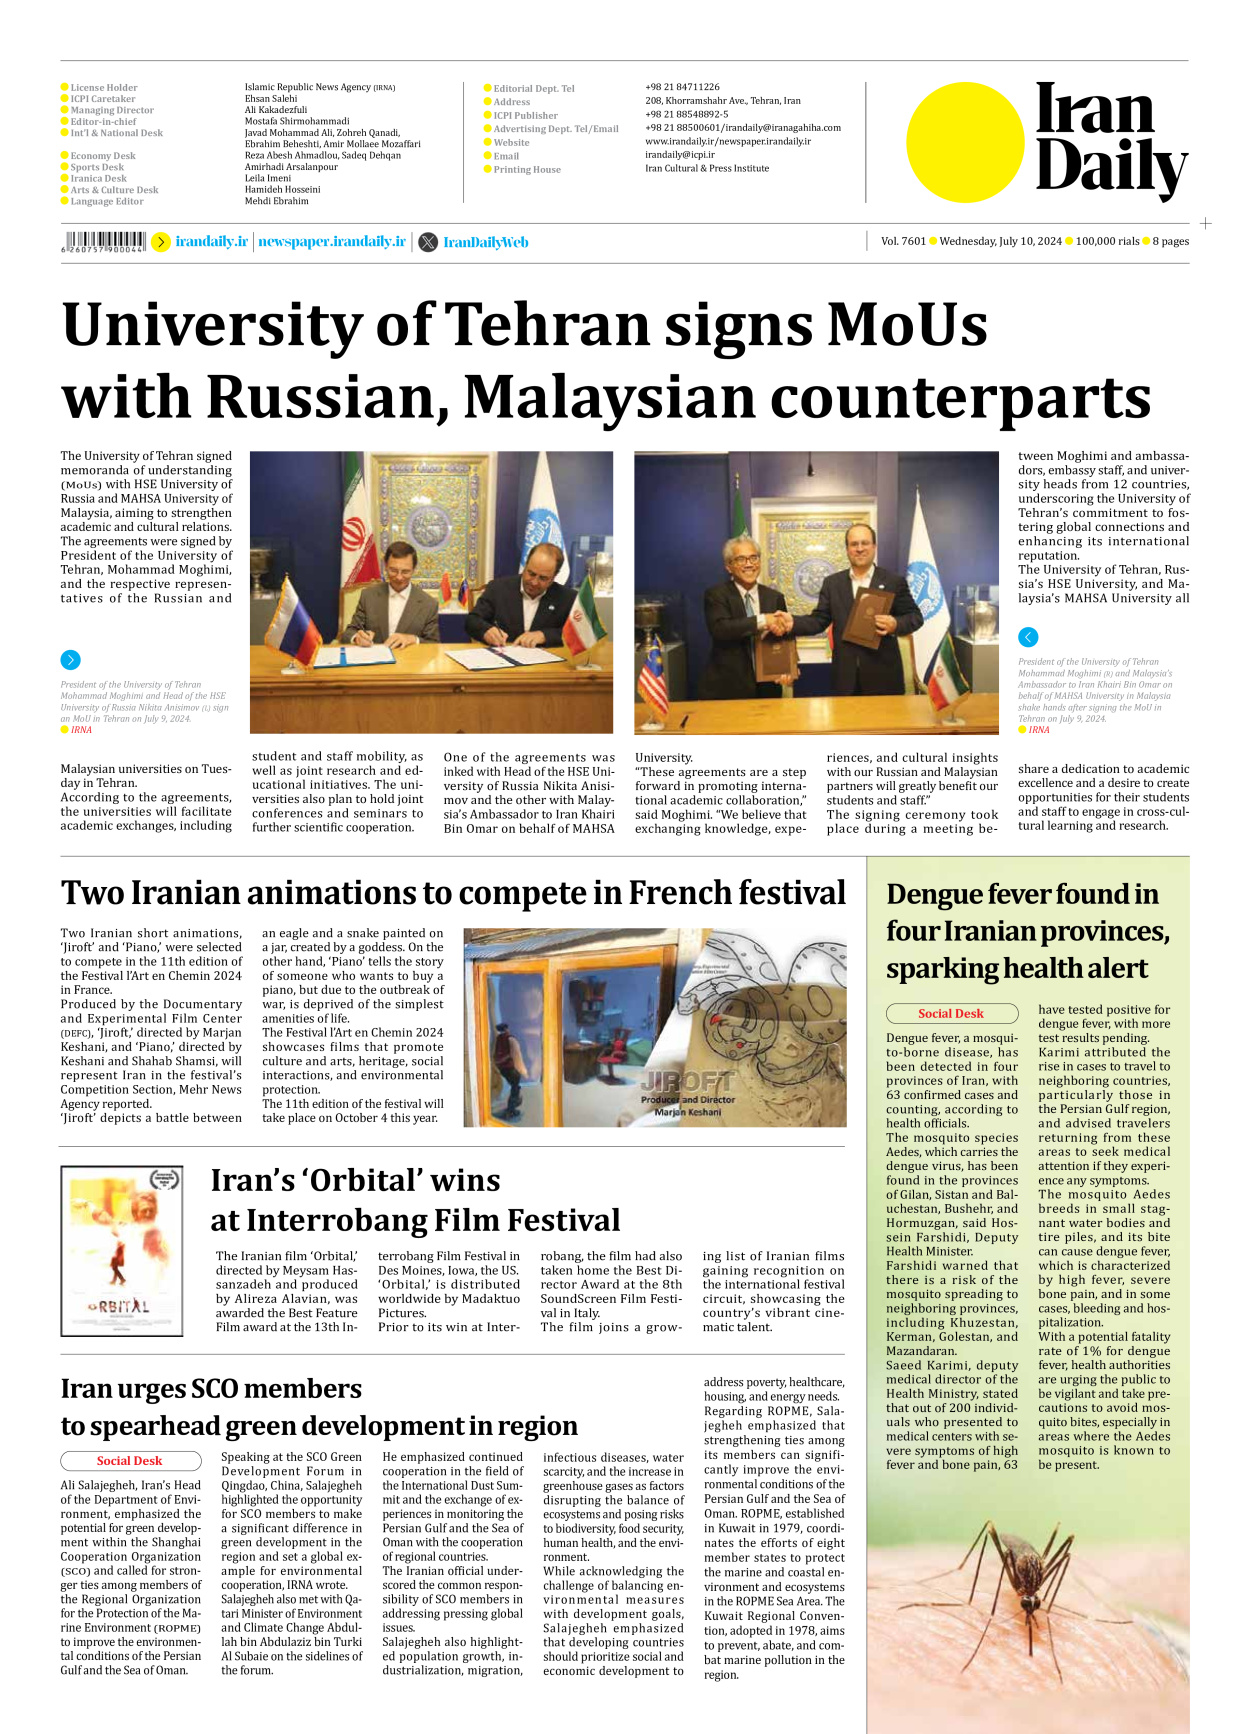 Iran Daily - Number Seven Thousand Six Hundred and One - 10 July 2024 - Page 8